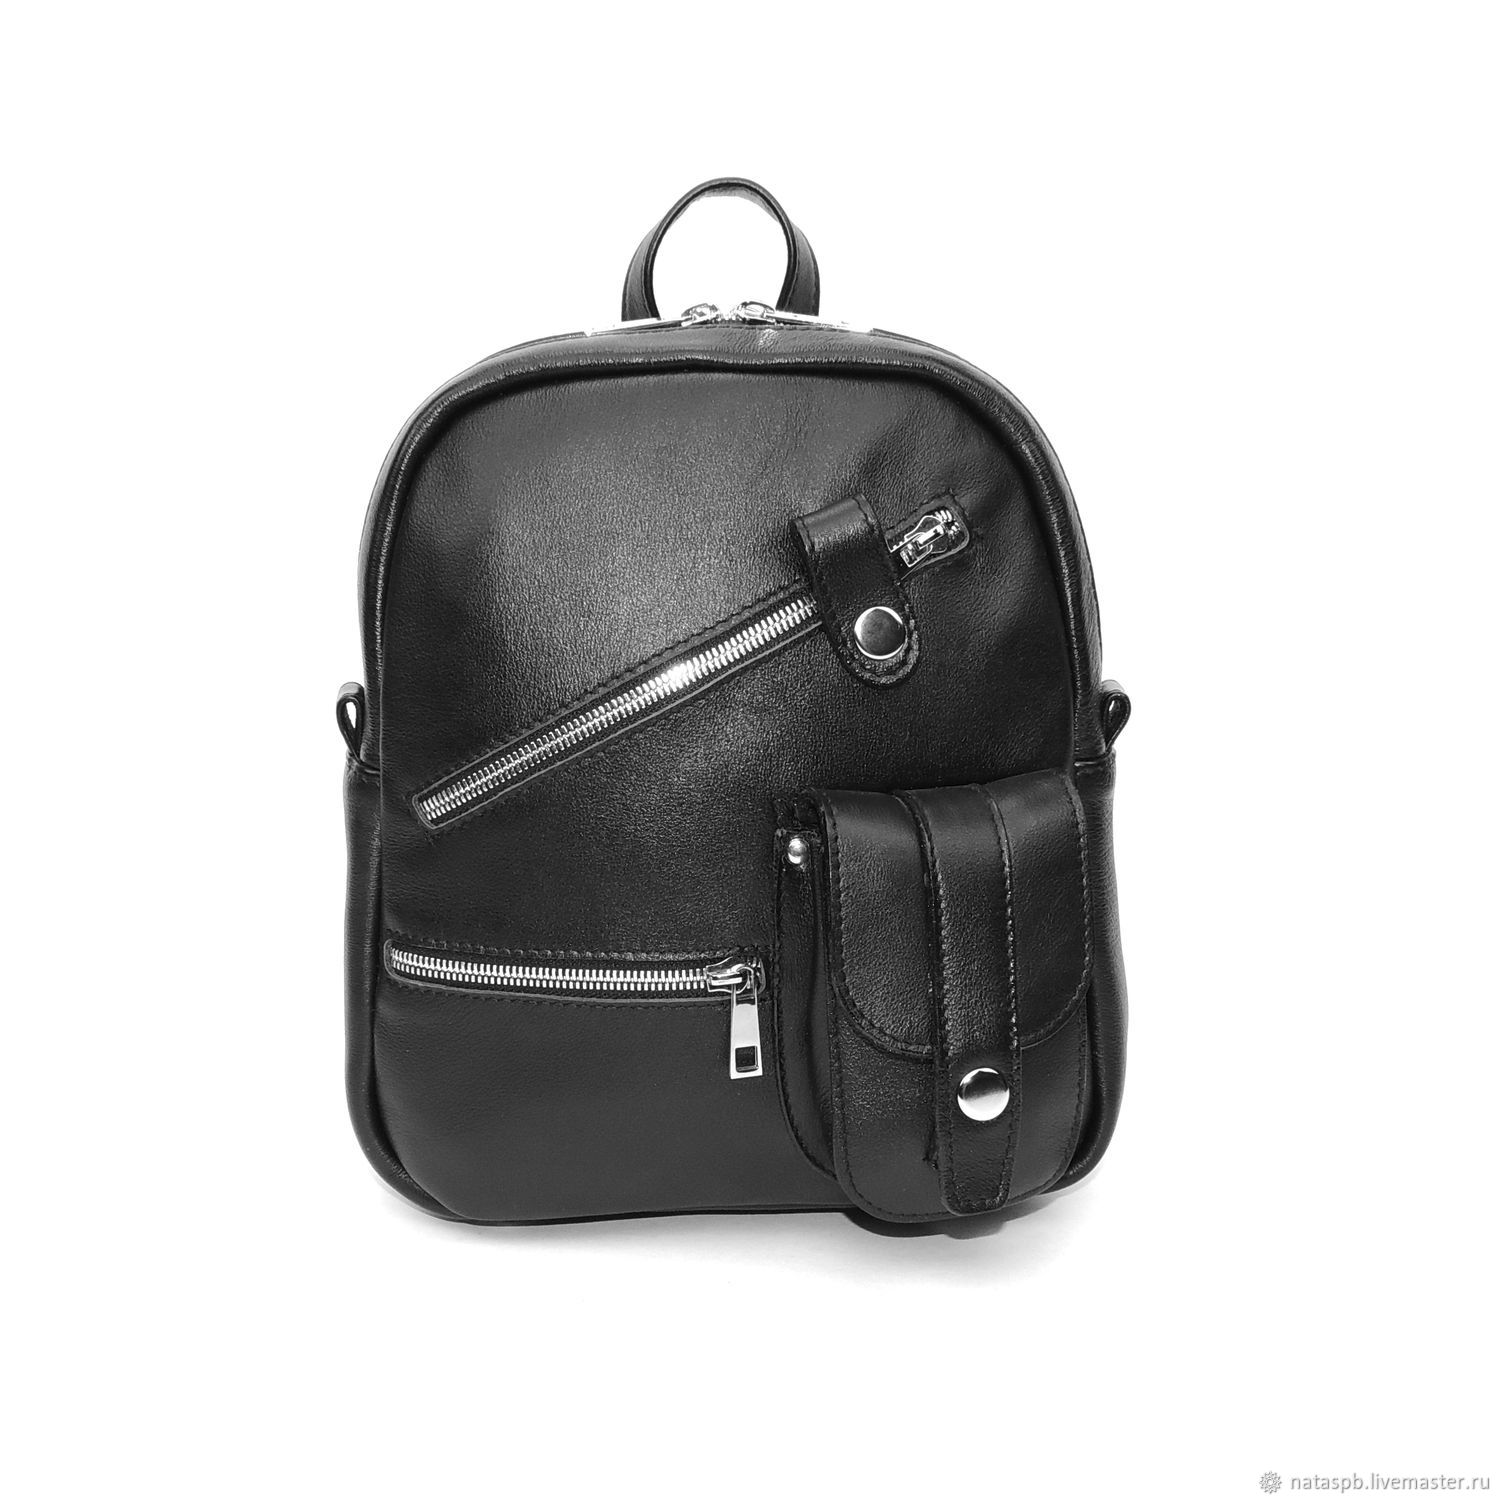  Mary Mod Leather Black Women's Backpack. R. 28-711, Backpacks, St. Petersburg,  Фото №1